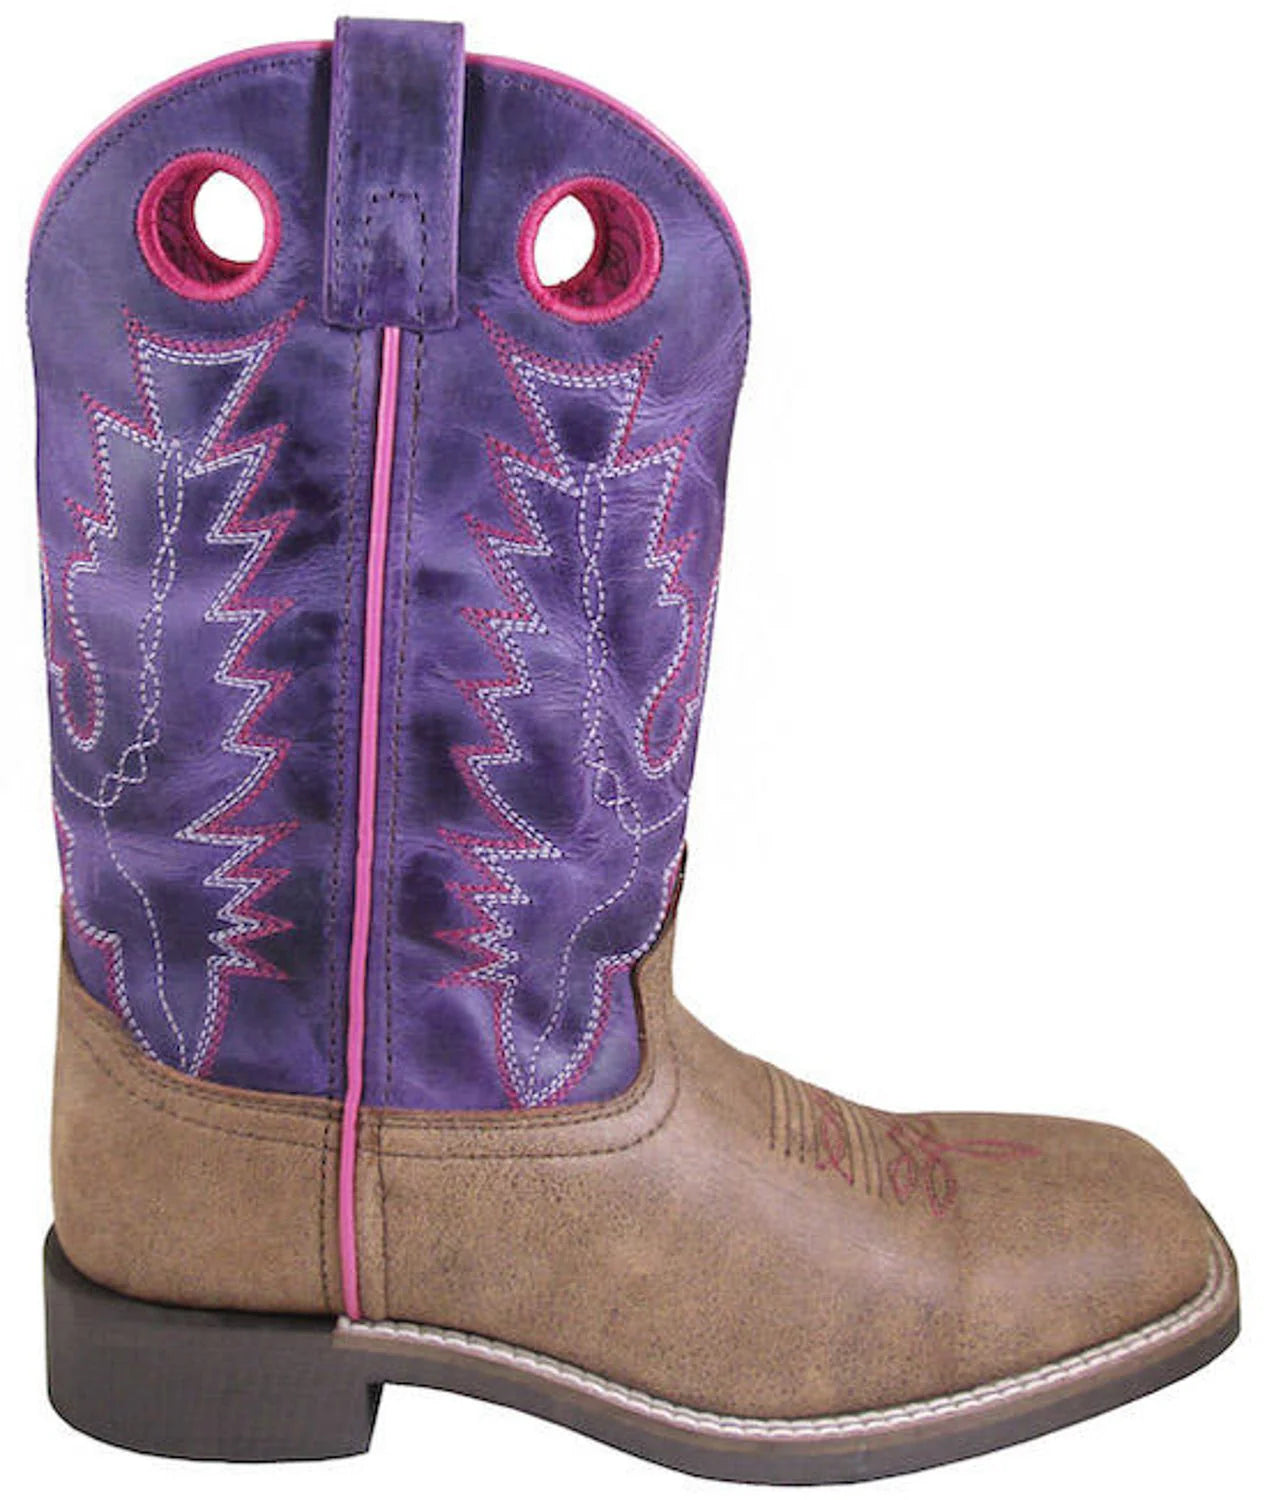 Smoky Mountain Womens Tracie Brown Distress/Purple Leather Cowboy Boots 6220